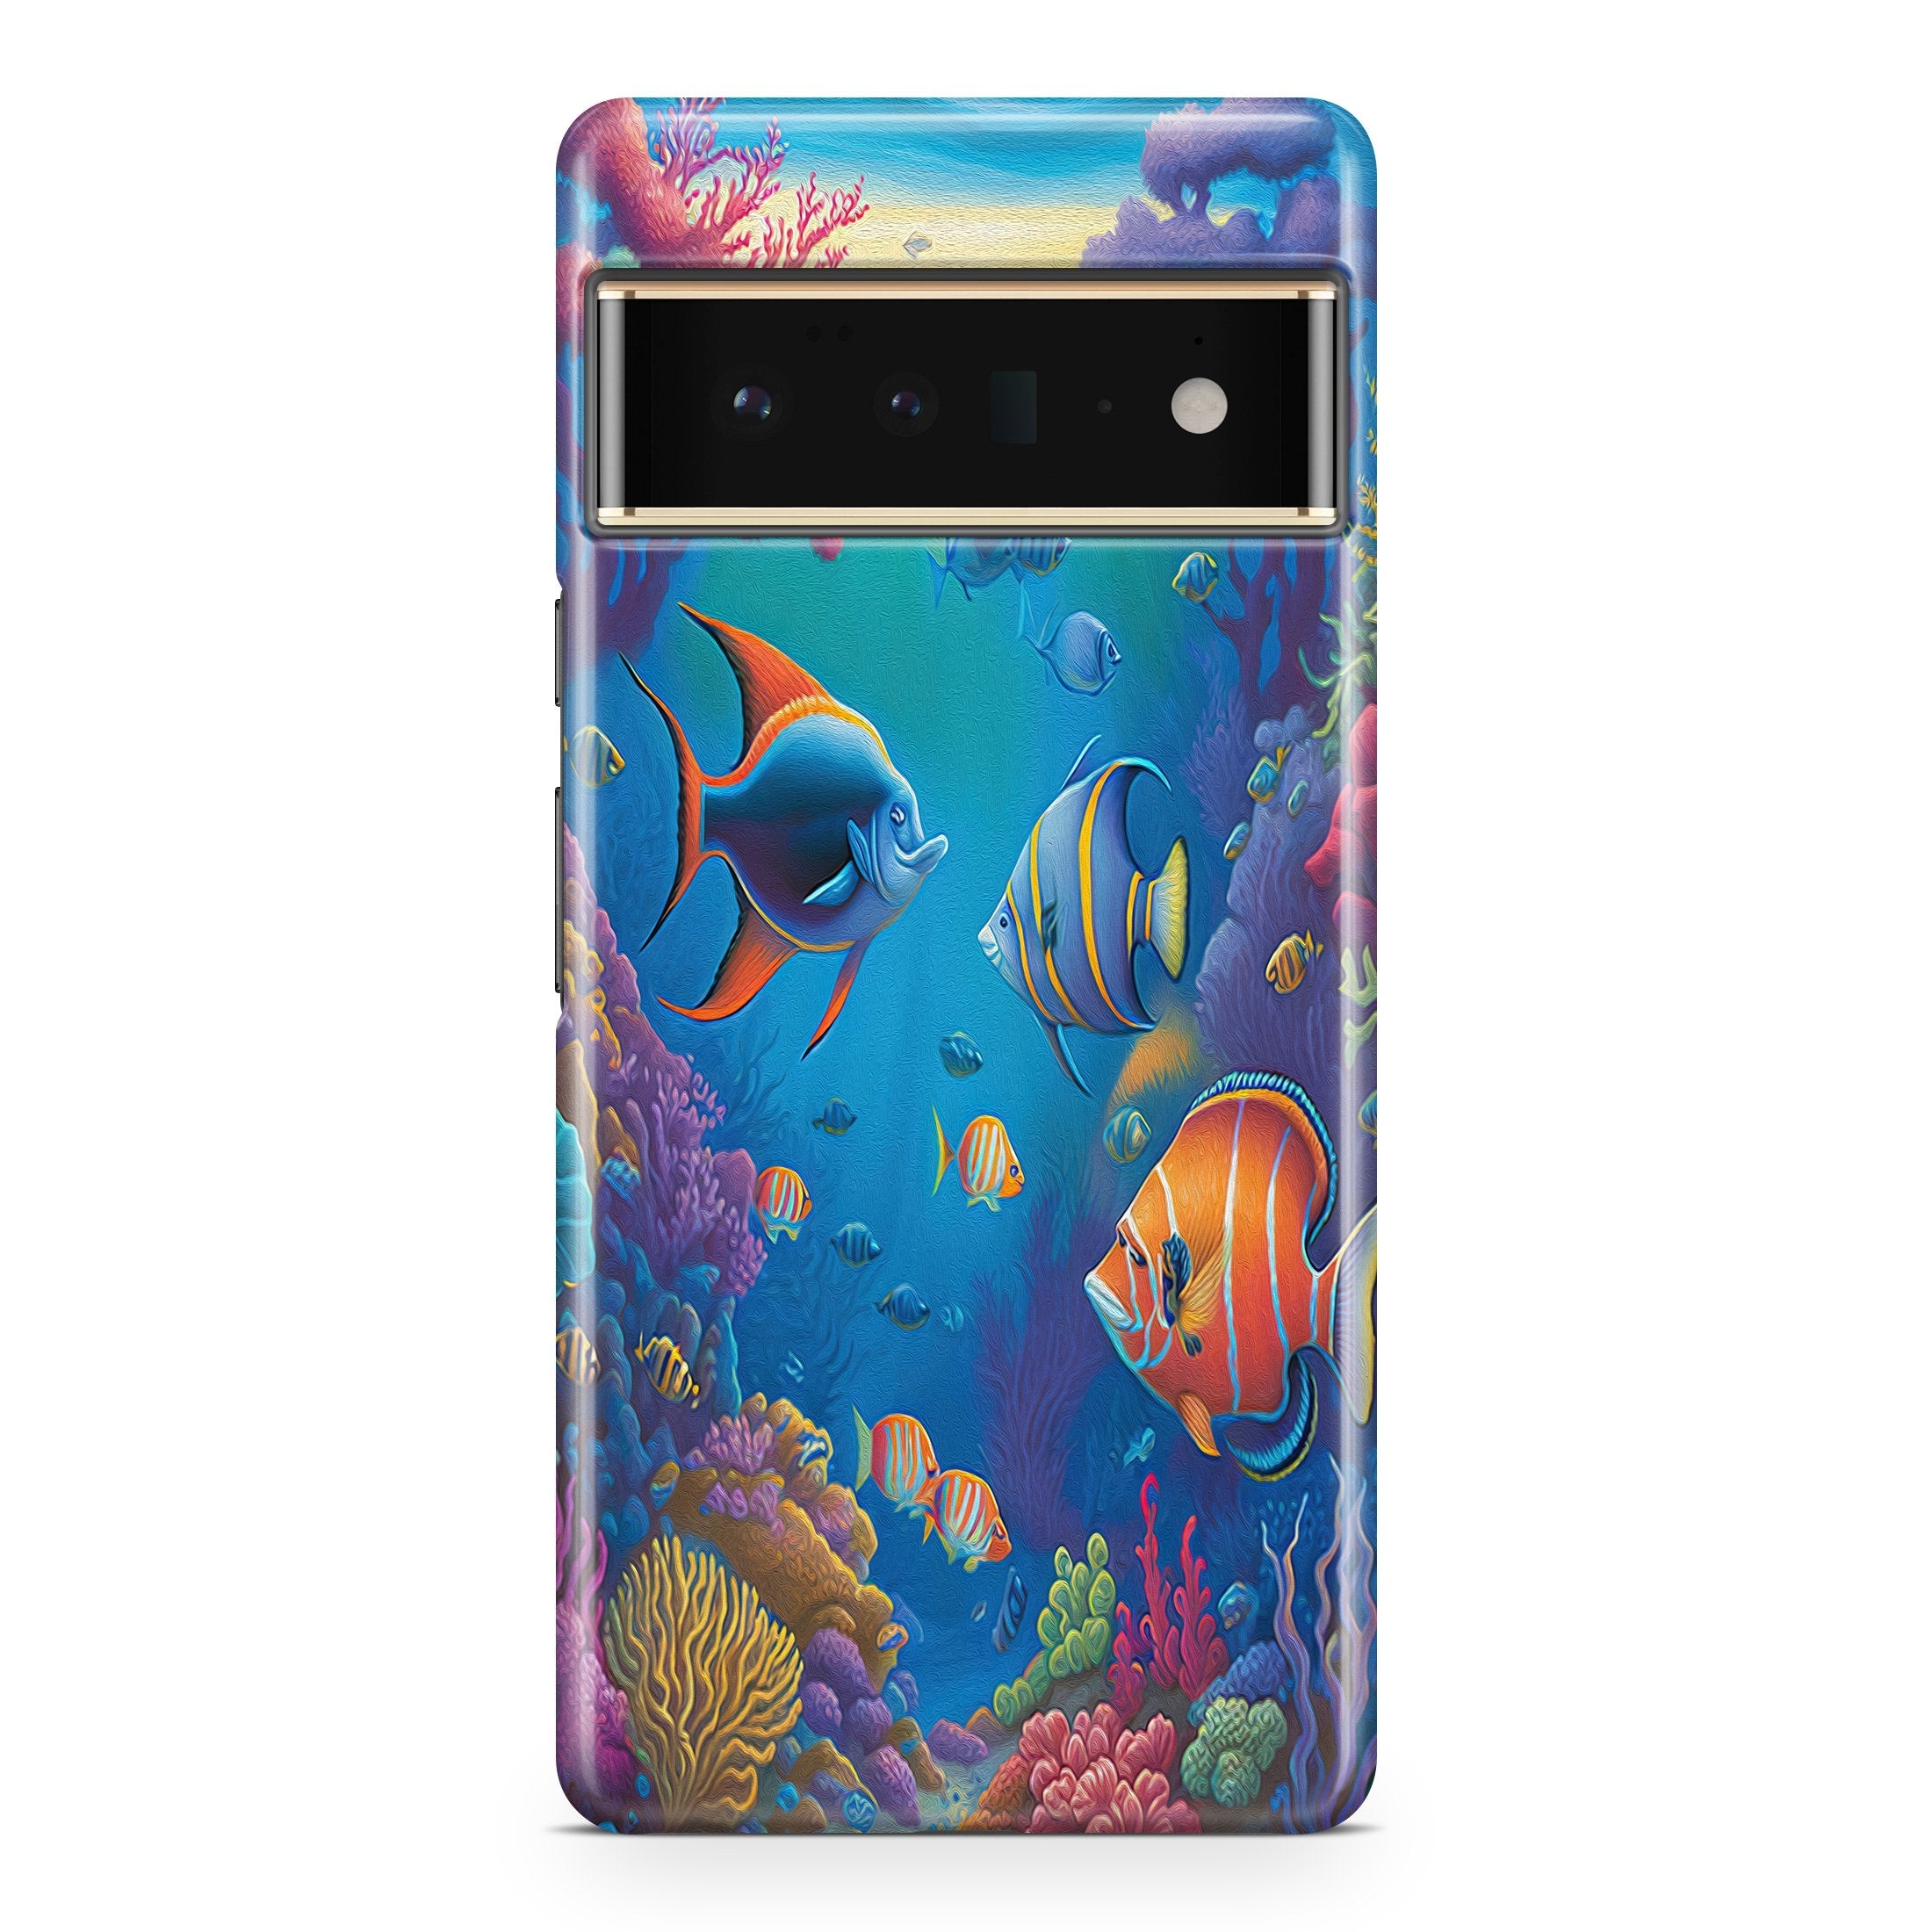 Heavenly Coral - Google phone case designs by CaseSwagger